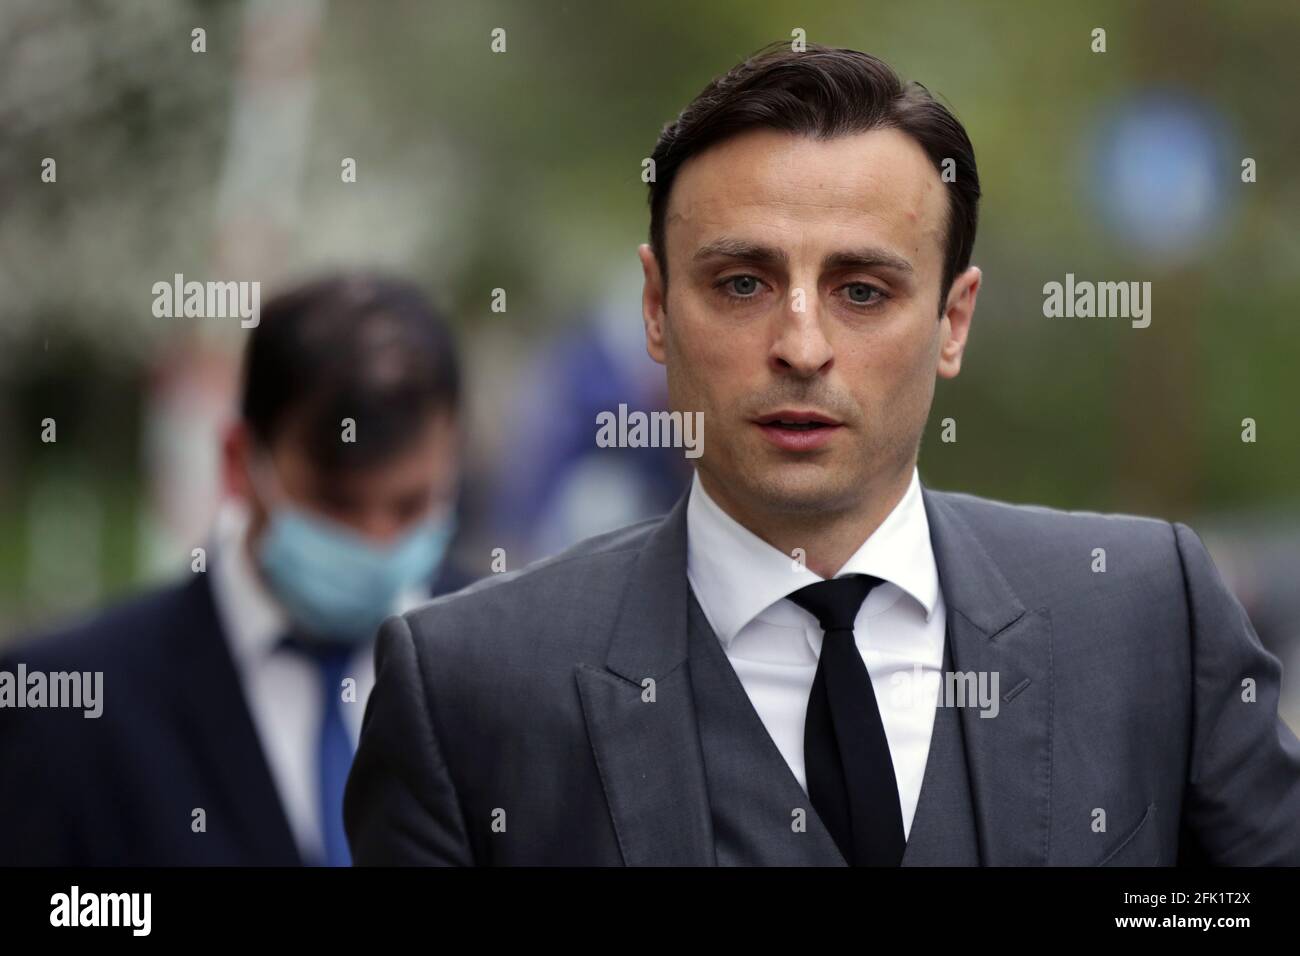 Sofia, Bulgaria: 27 April, 2021: Bulgarian former professional footballer Dimitar Berbatov leaves a press conference at which he announced that he would run for president of the Bulgarian Football Union. Stock Photo